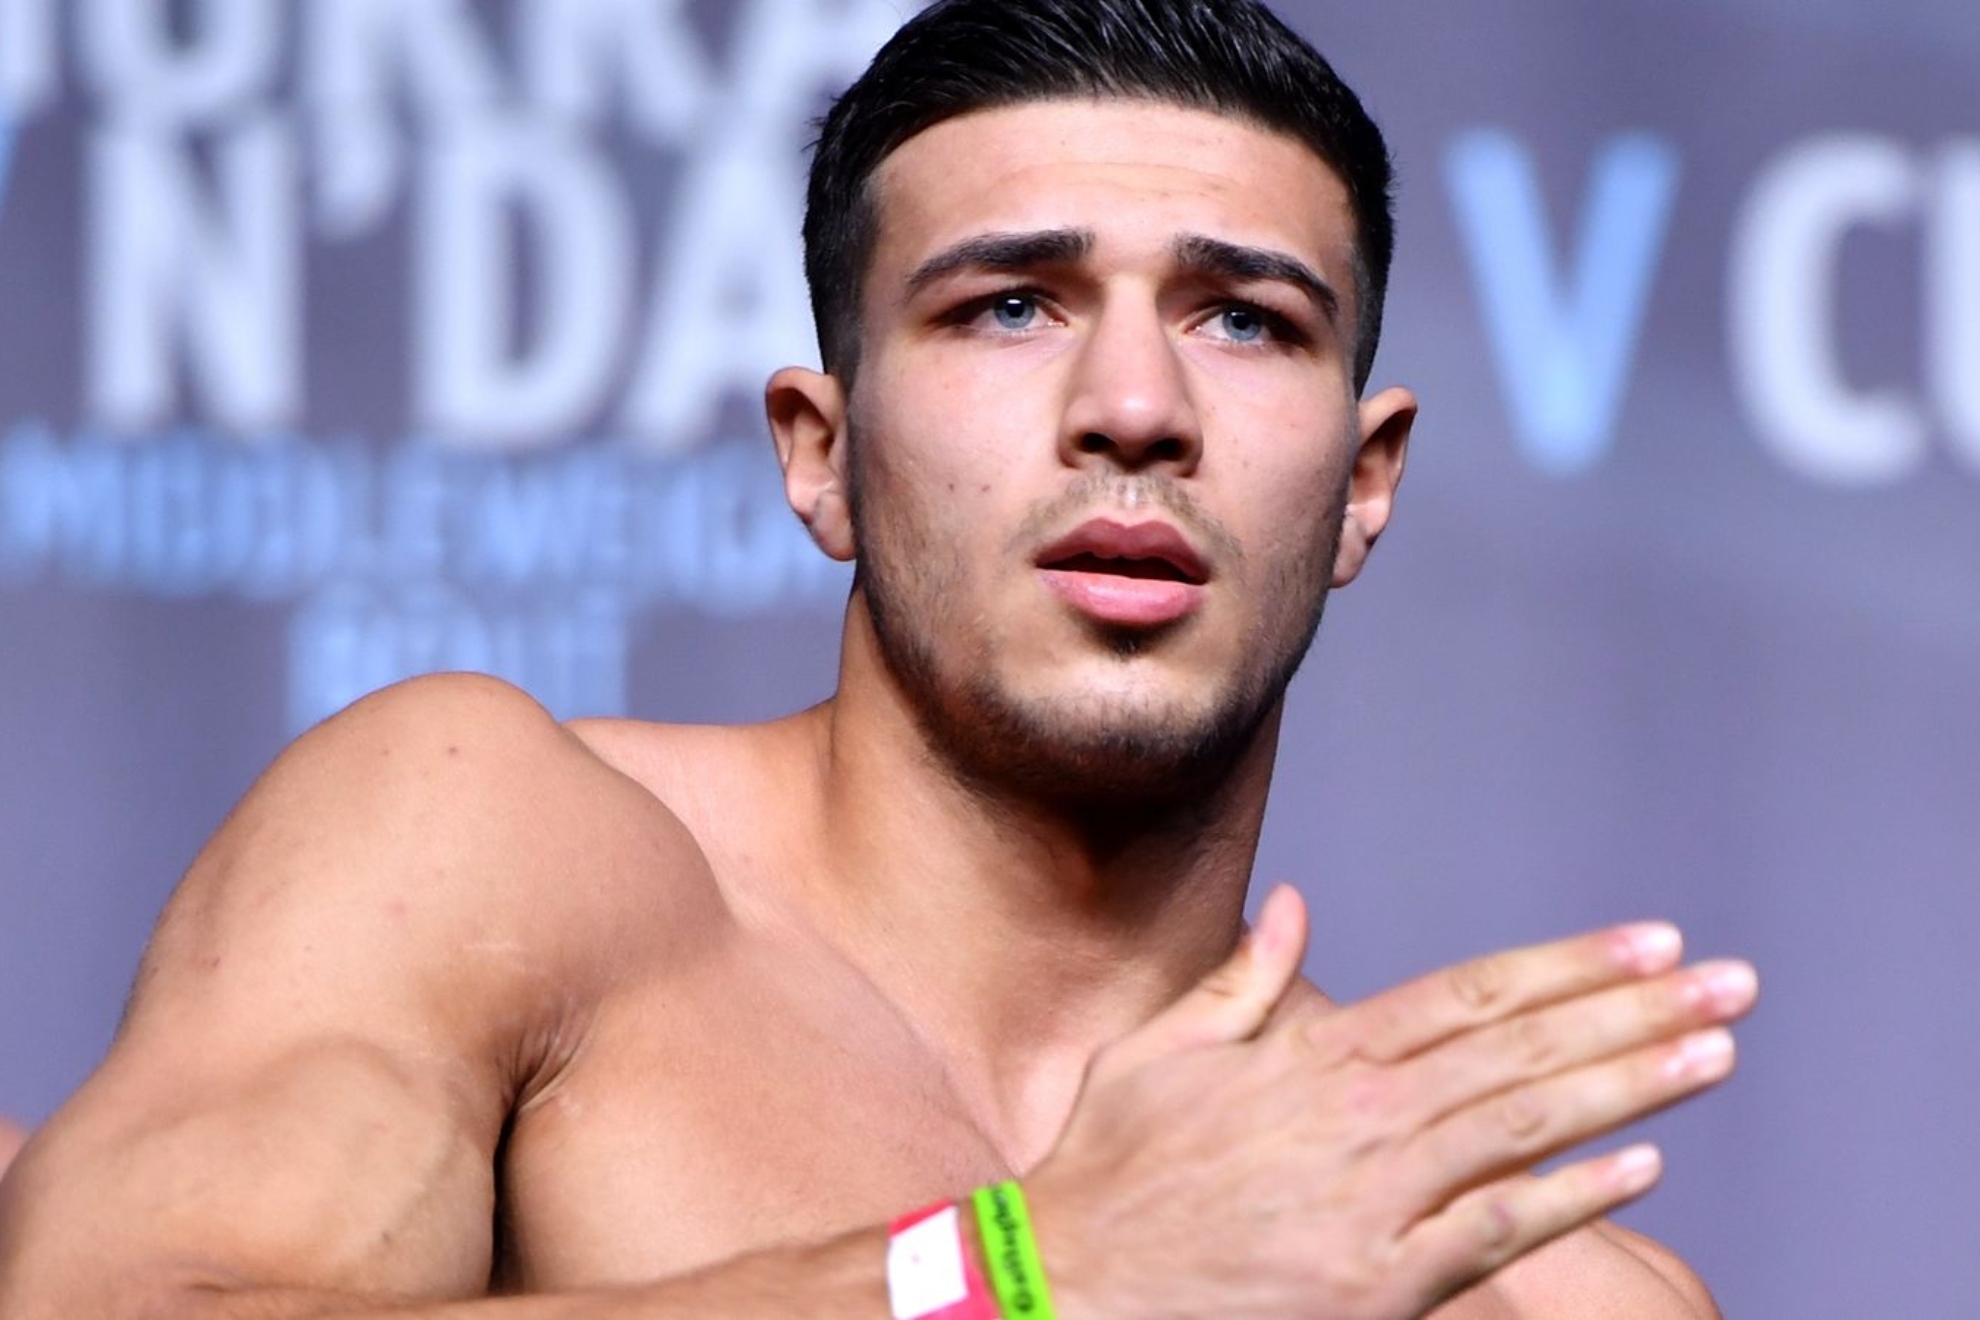 Tommy Fury displays stunning new physique as he prepares for KSI fight